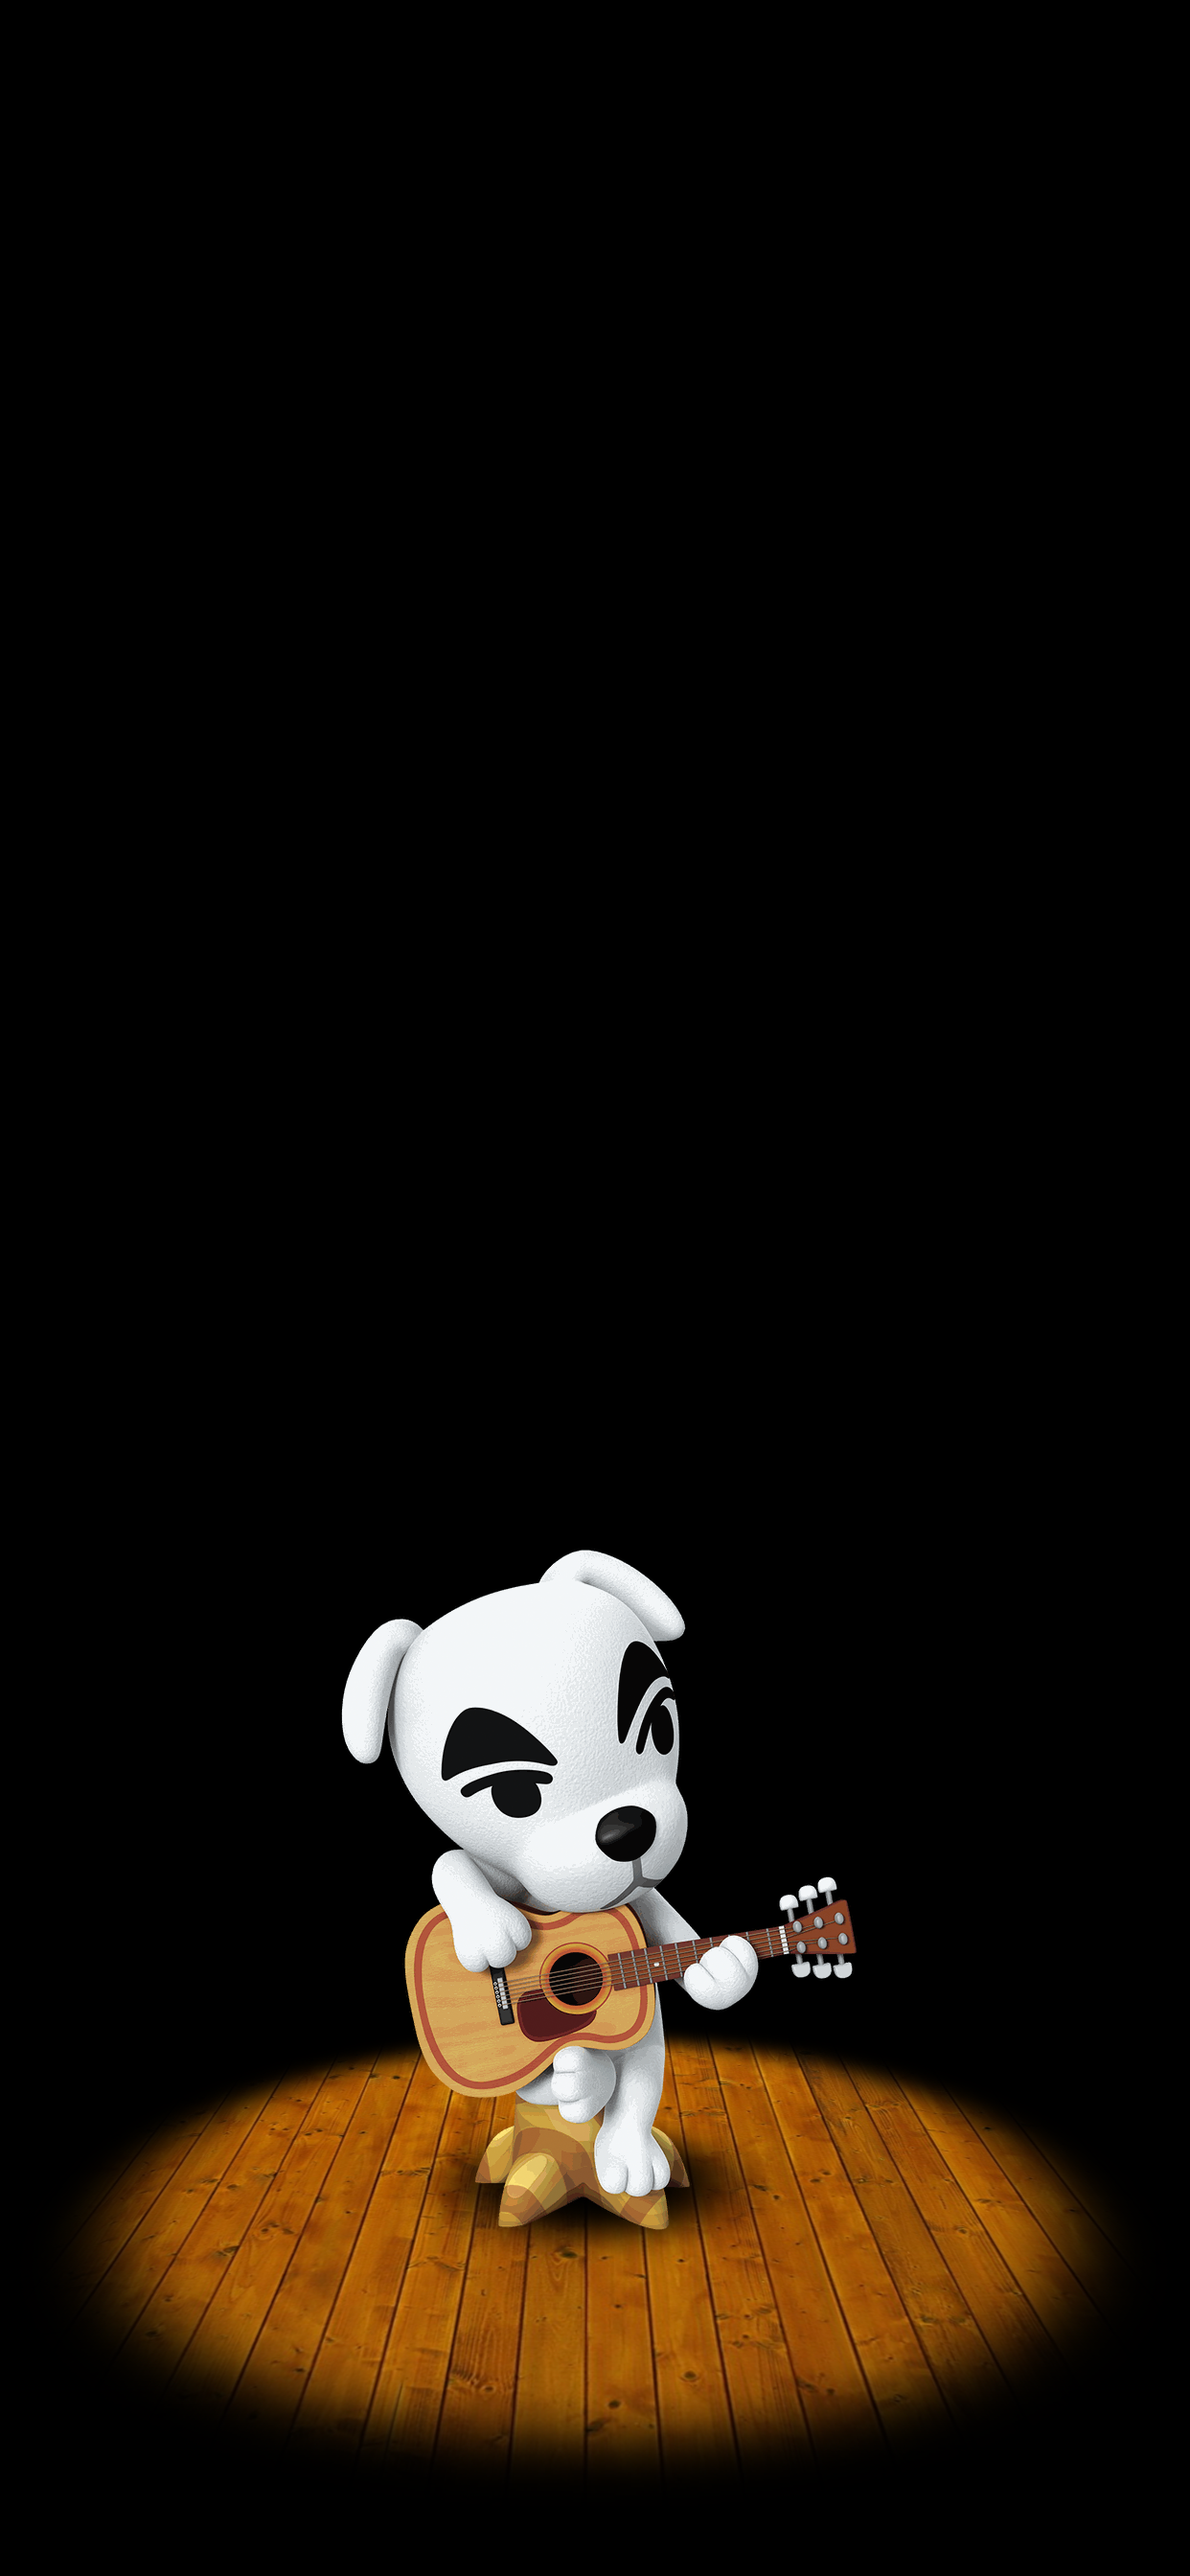 My first Animal Crossing wallpaper for AMOLED phones was a hit, so I made a second one: K.K. Slider!